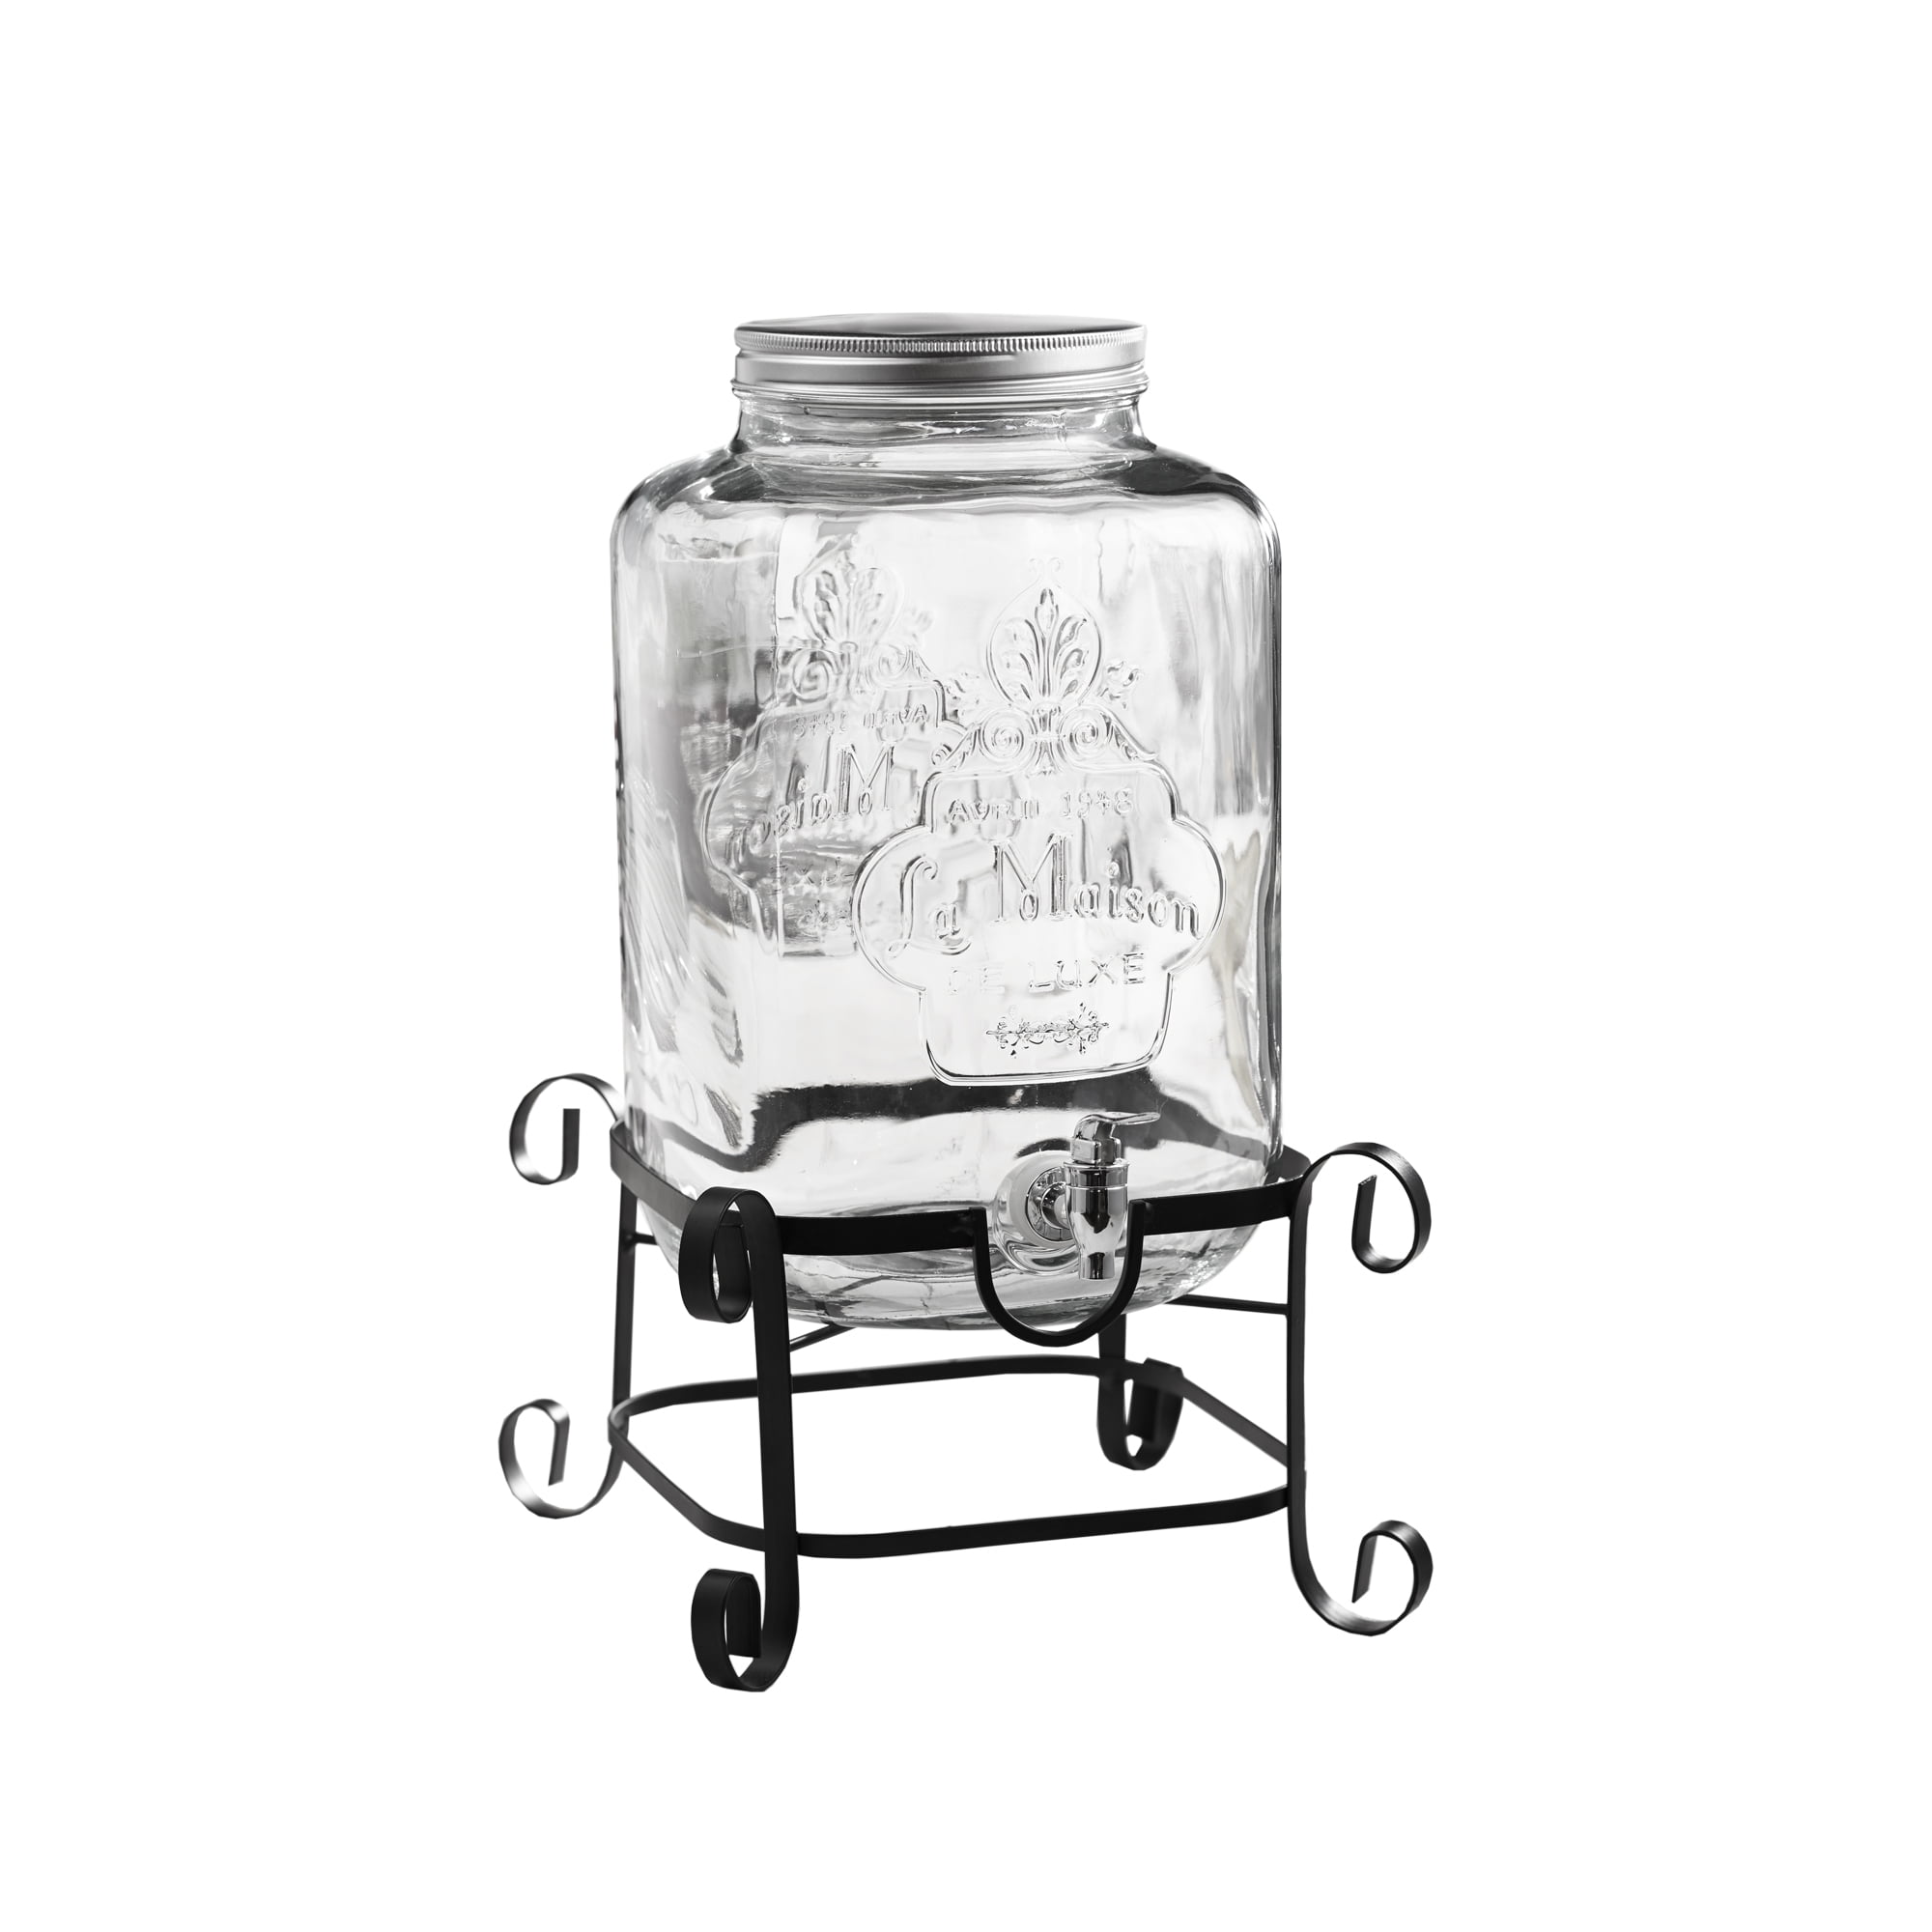 Cal-Mil 3497-3-55 Stainless Steel 3 Gallon Beverage Dispenser with Wire  Stand - 14 x 14 x 18